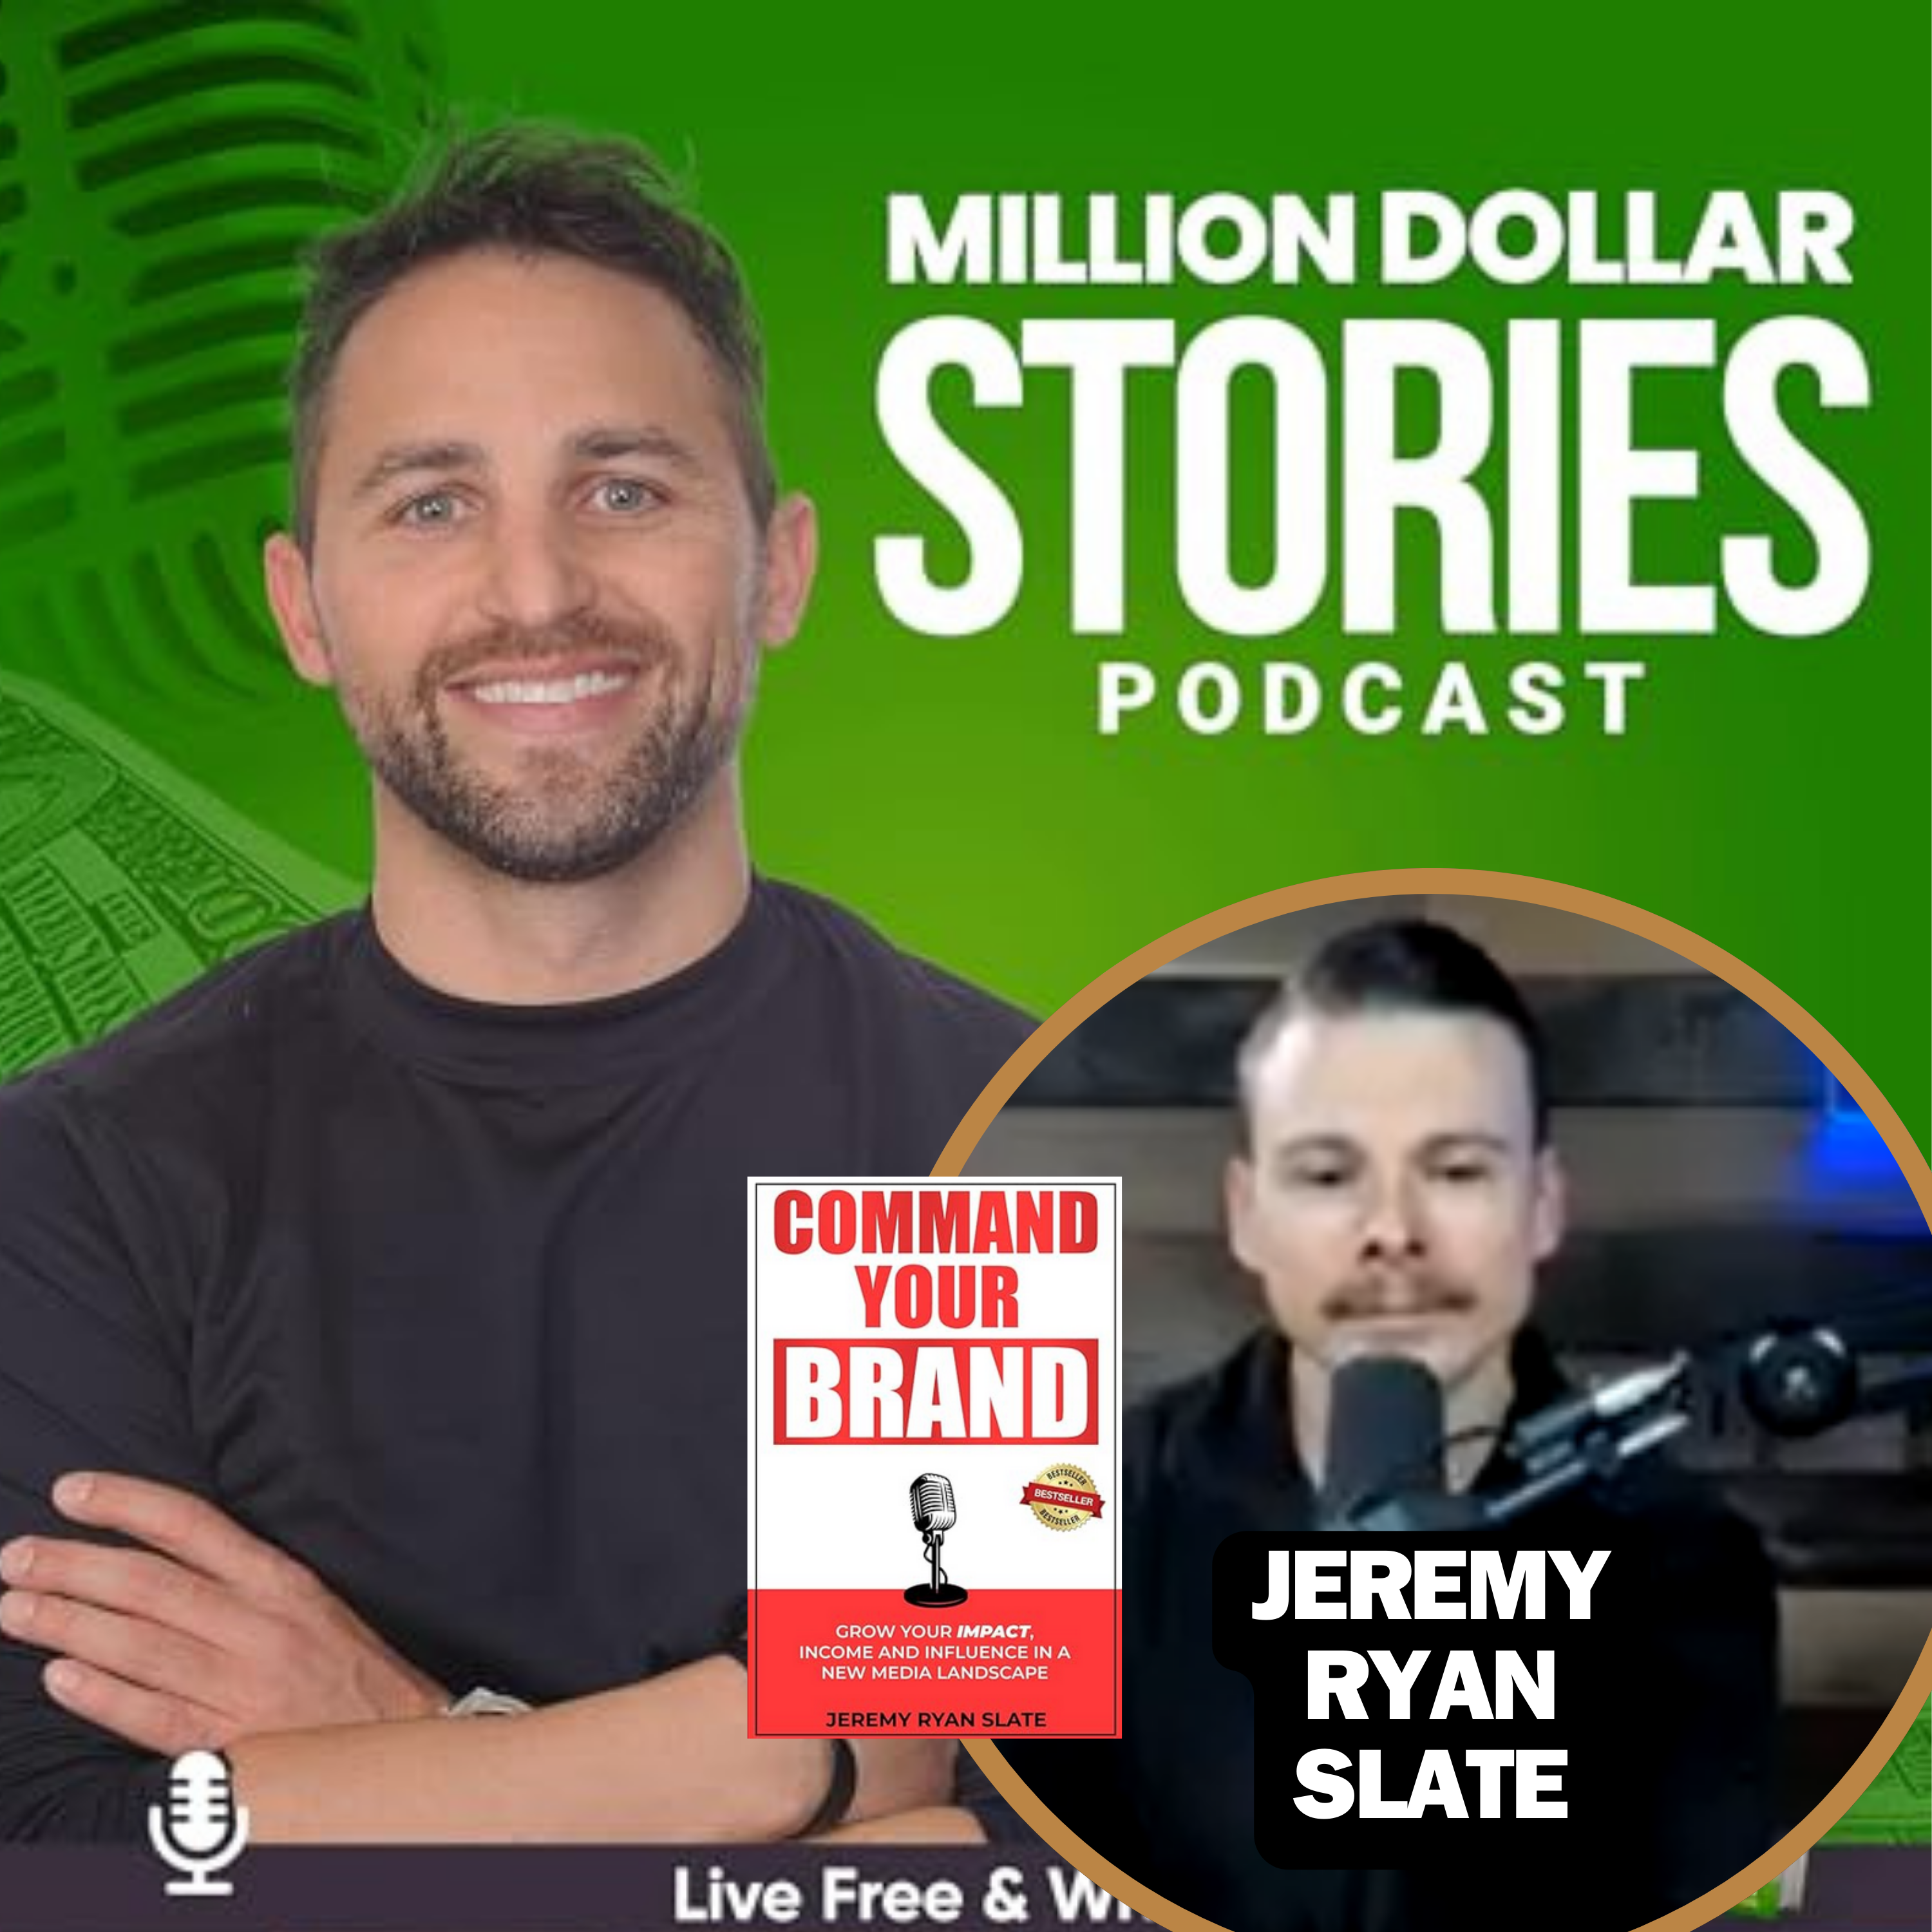 Jeremy Ryan Slate -Author of “Command Your Brand”